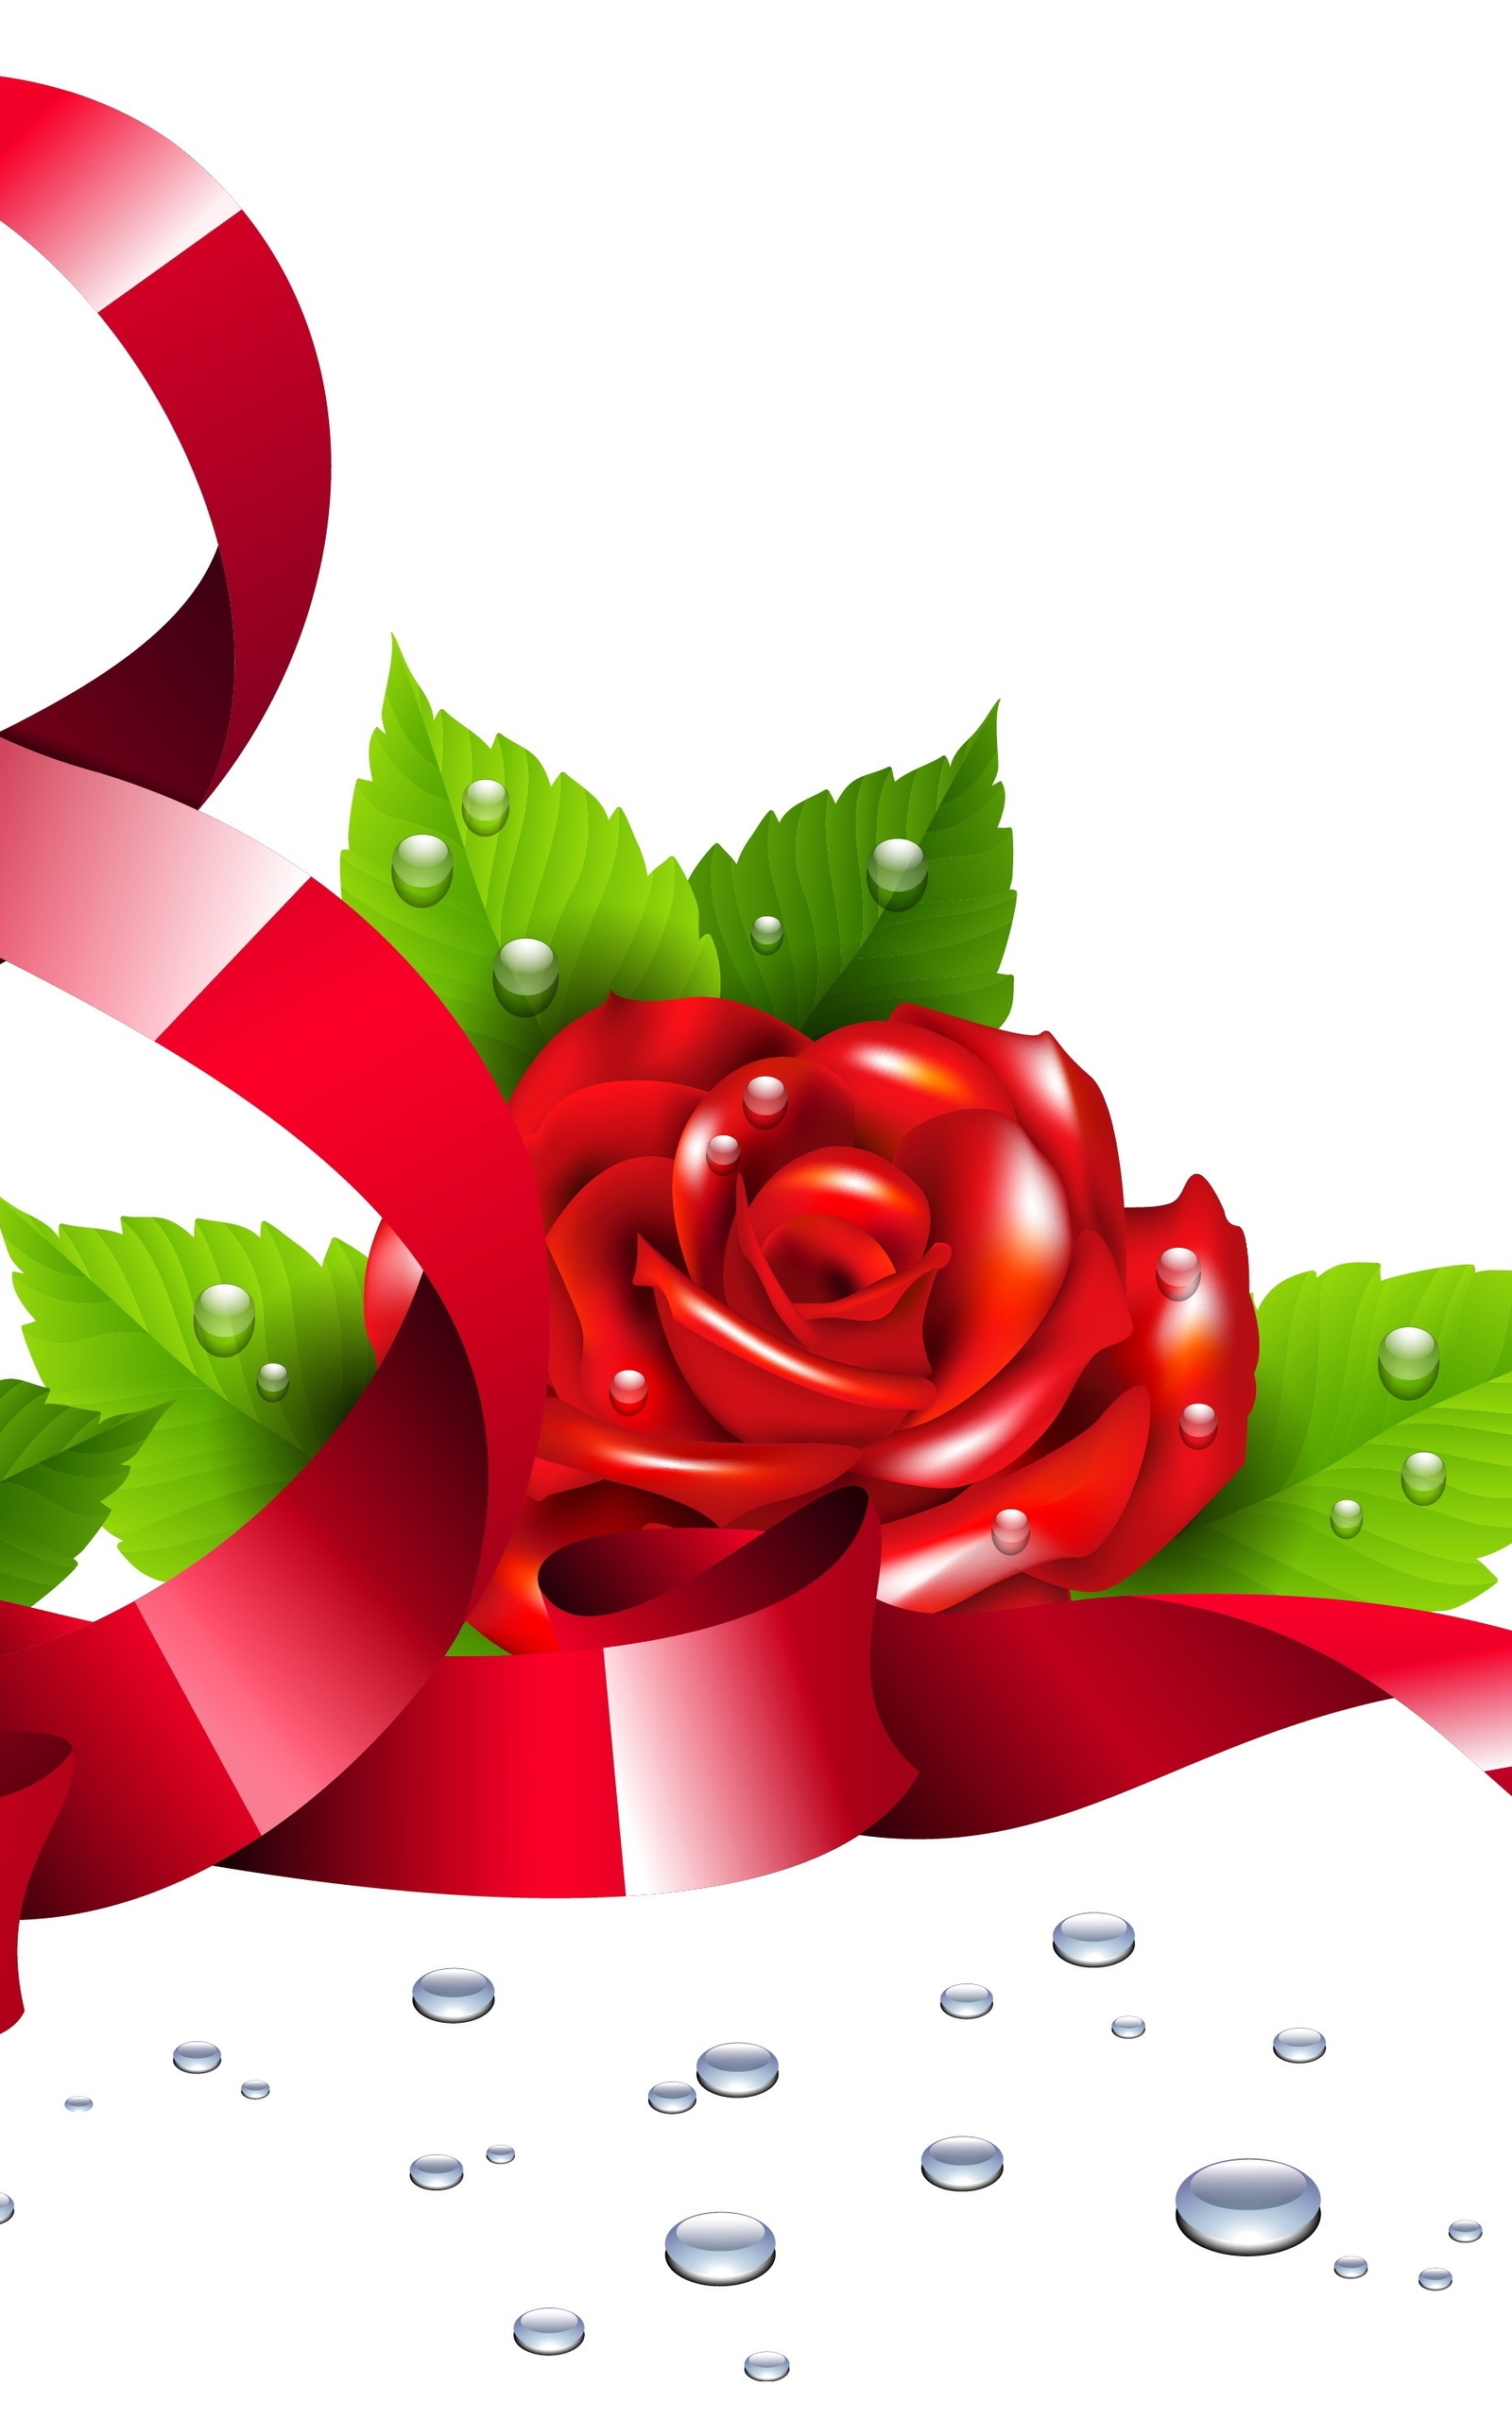 Image: 8 March, women's day, spring, roses, white background, ribbon, red